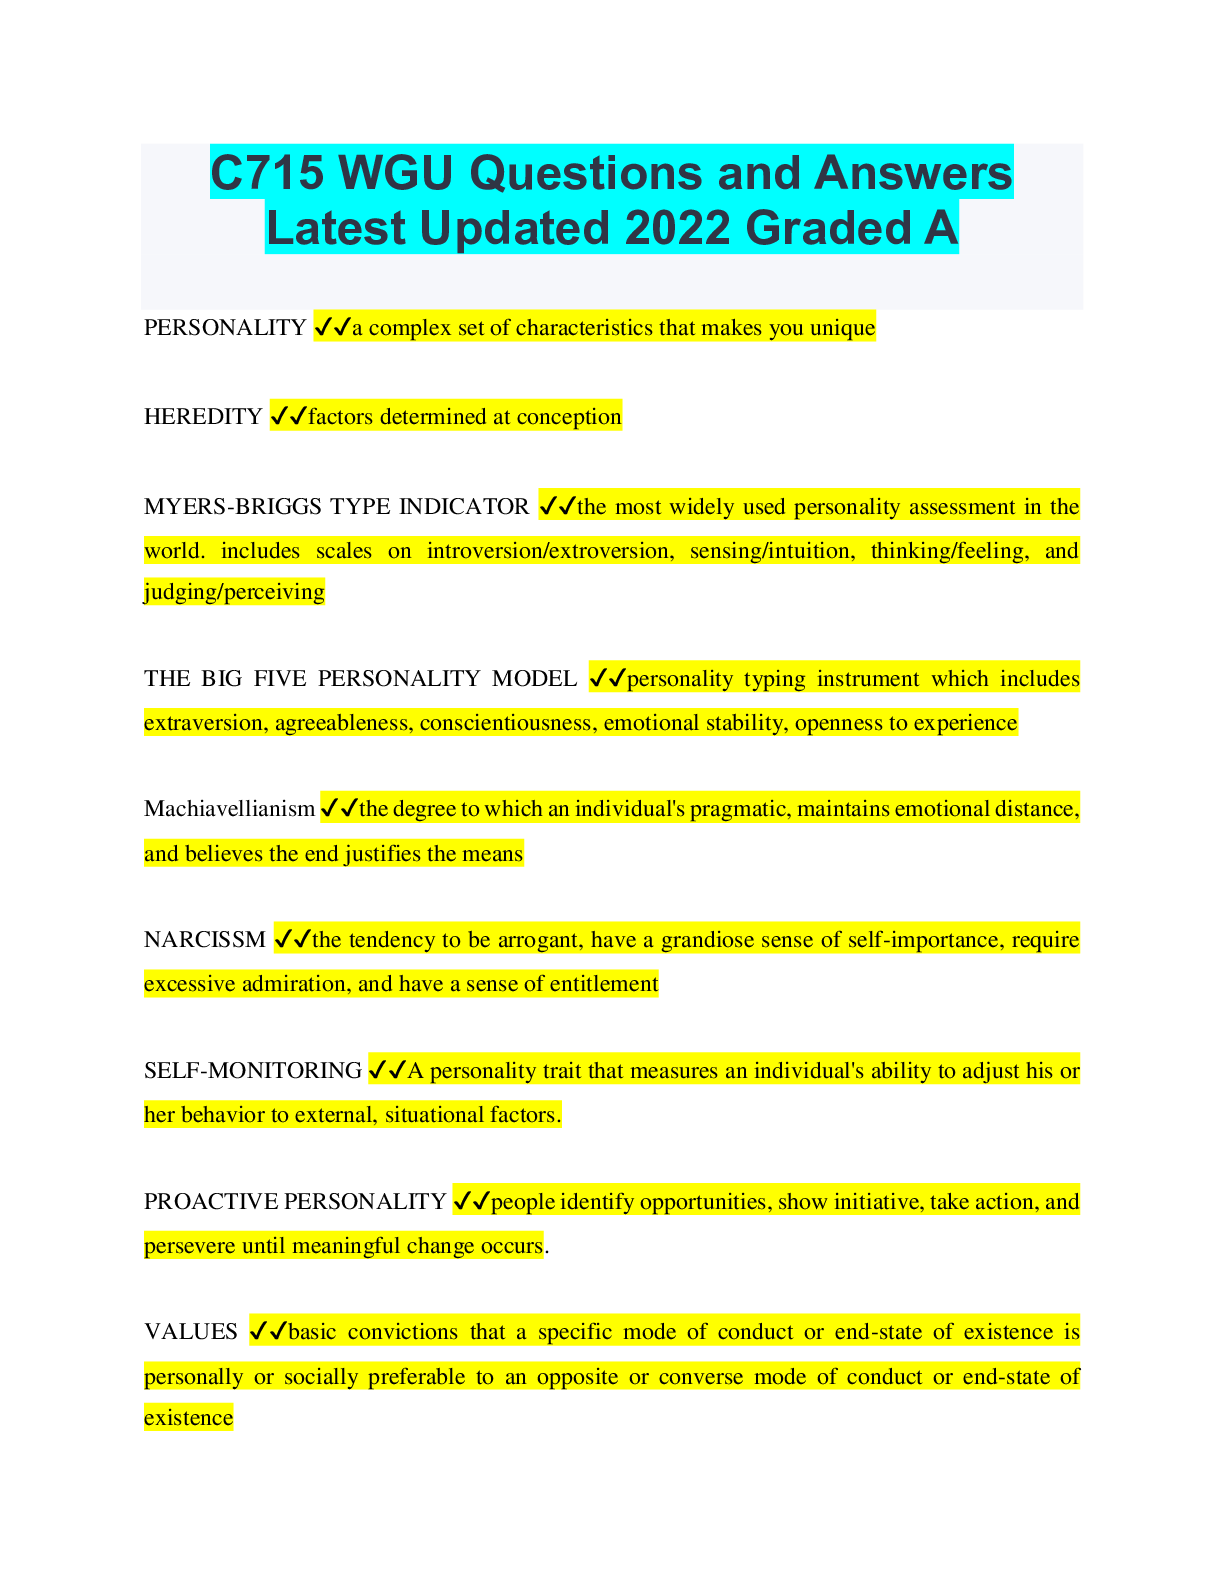 C715 WGU Questions and Answers Latest Updated 2022 Graded A Browsegrades